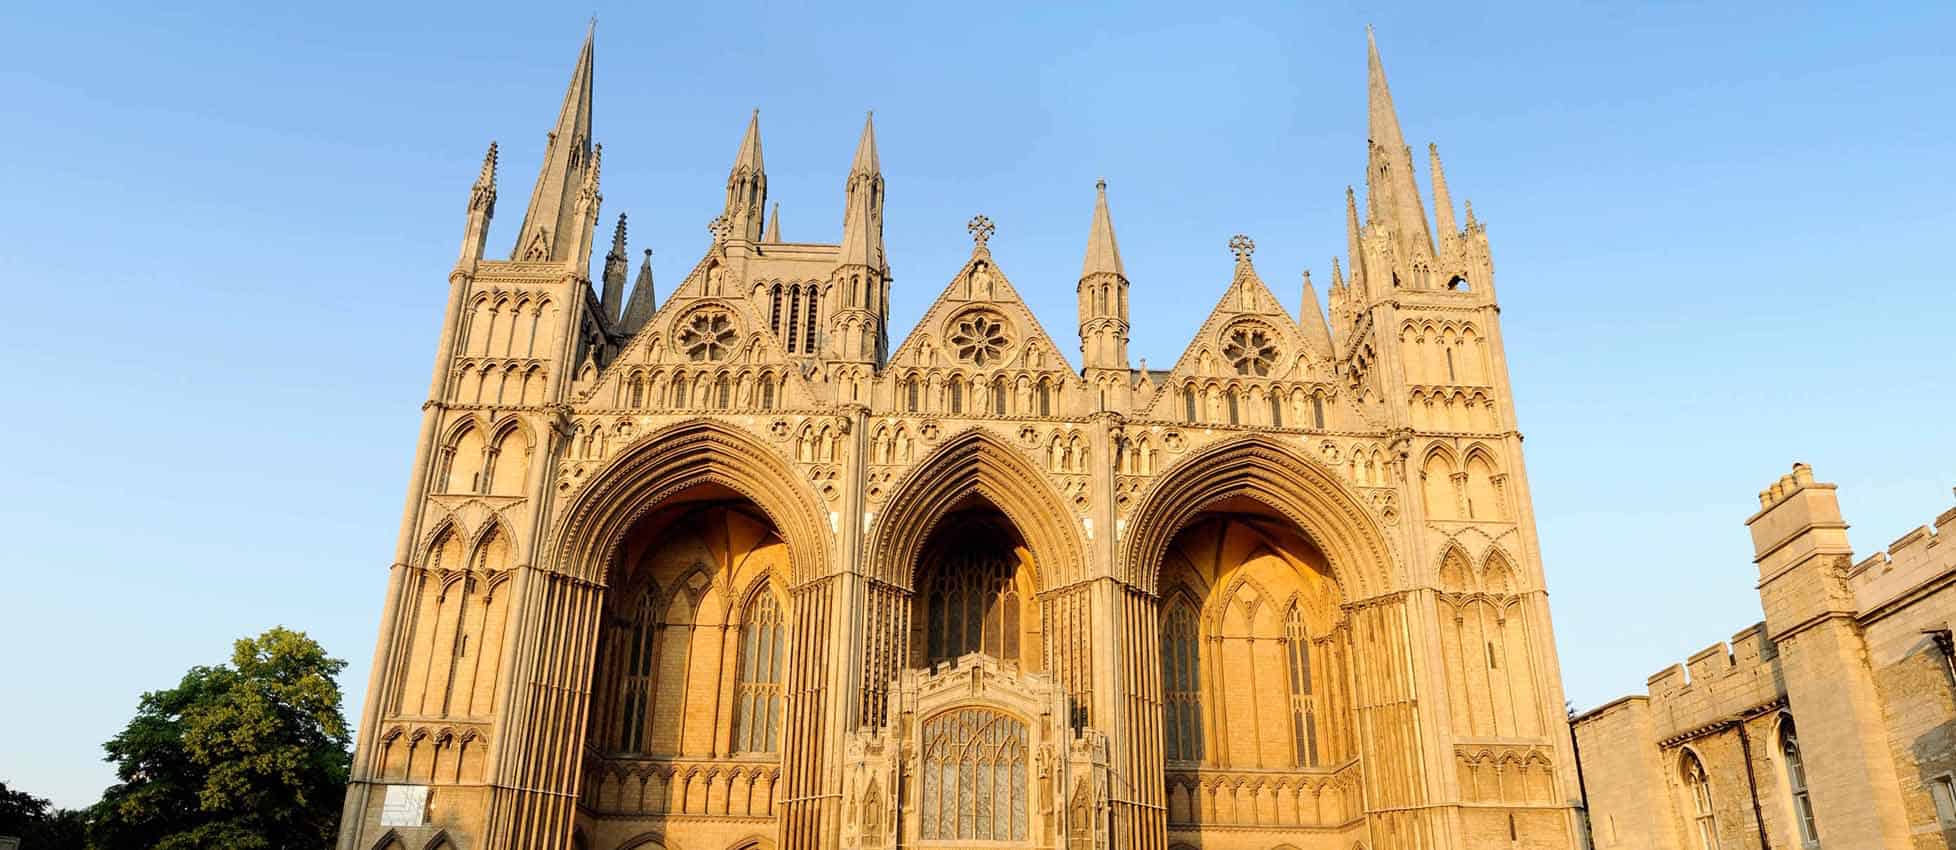 Peterborough Cathedral - The Association of English Cathedrals